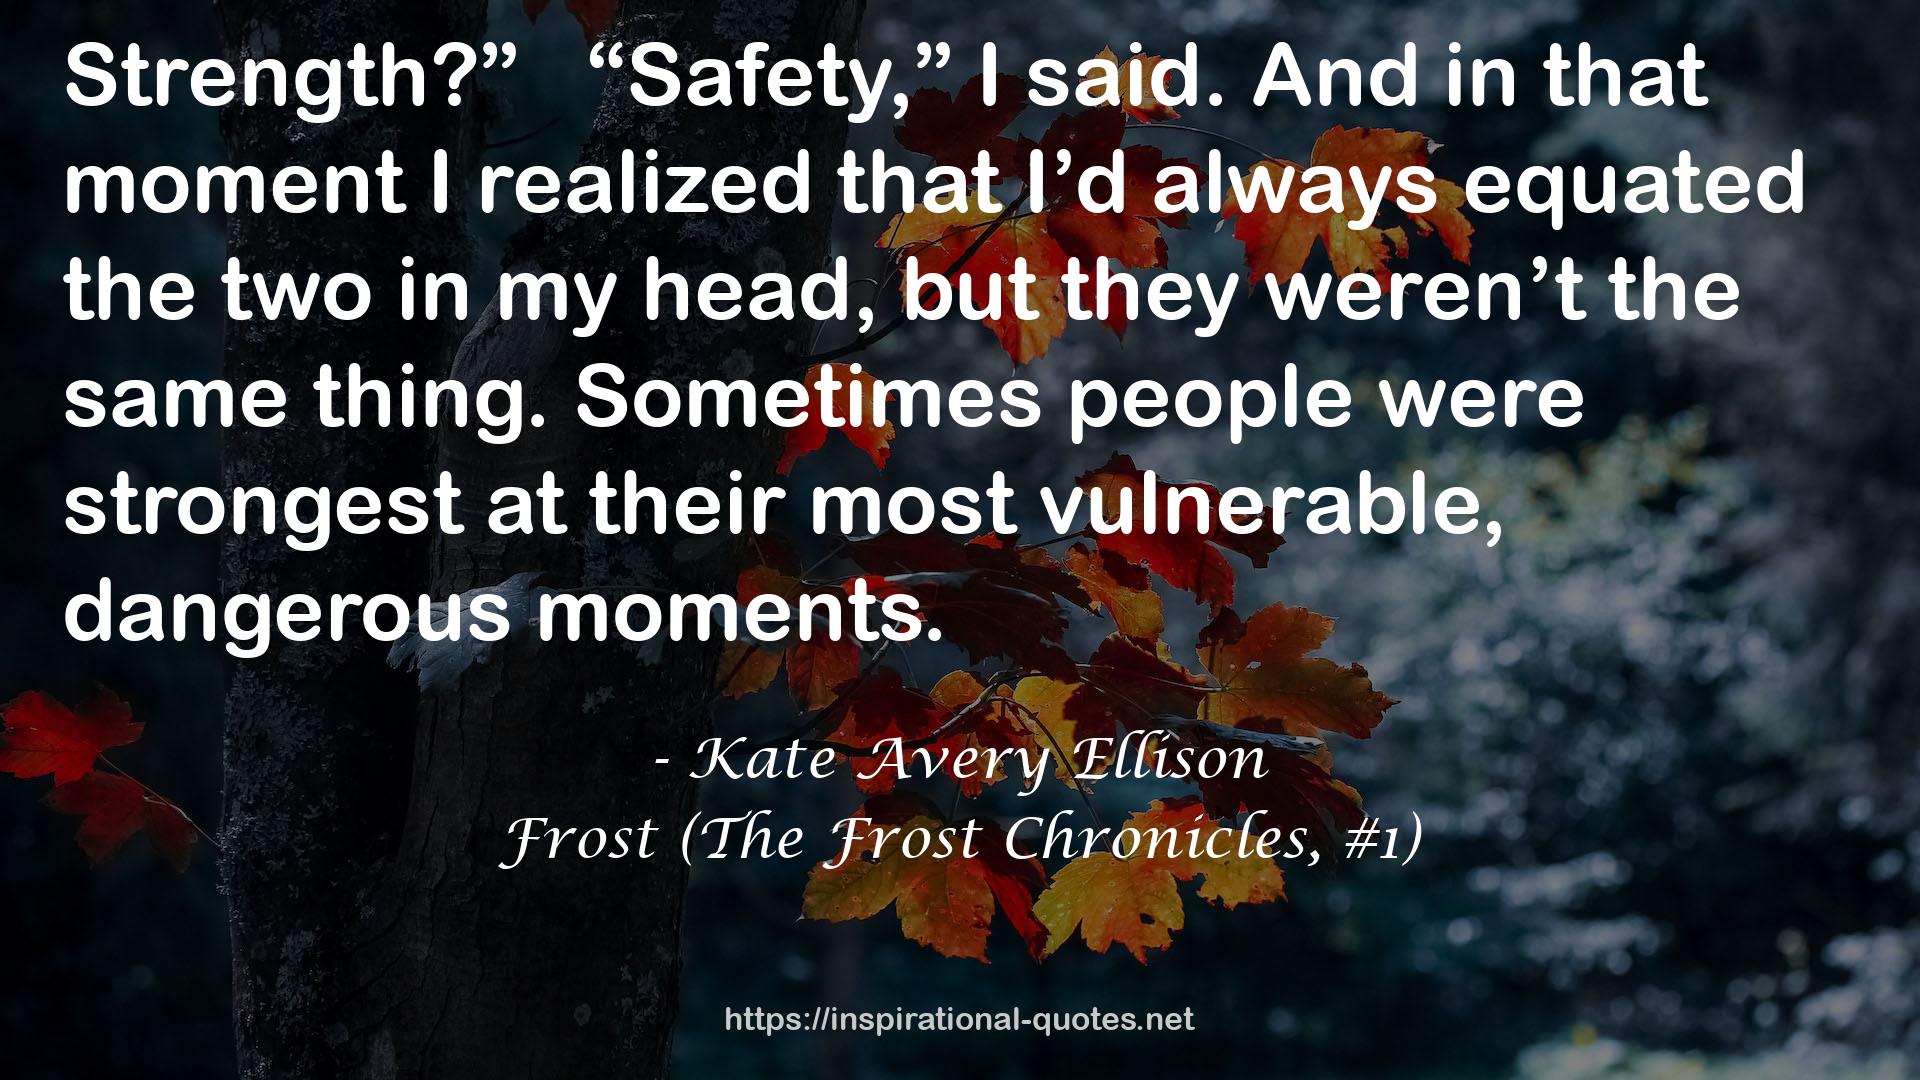 Frost (The Frost Chronicles, #1) QUOTES